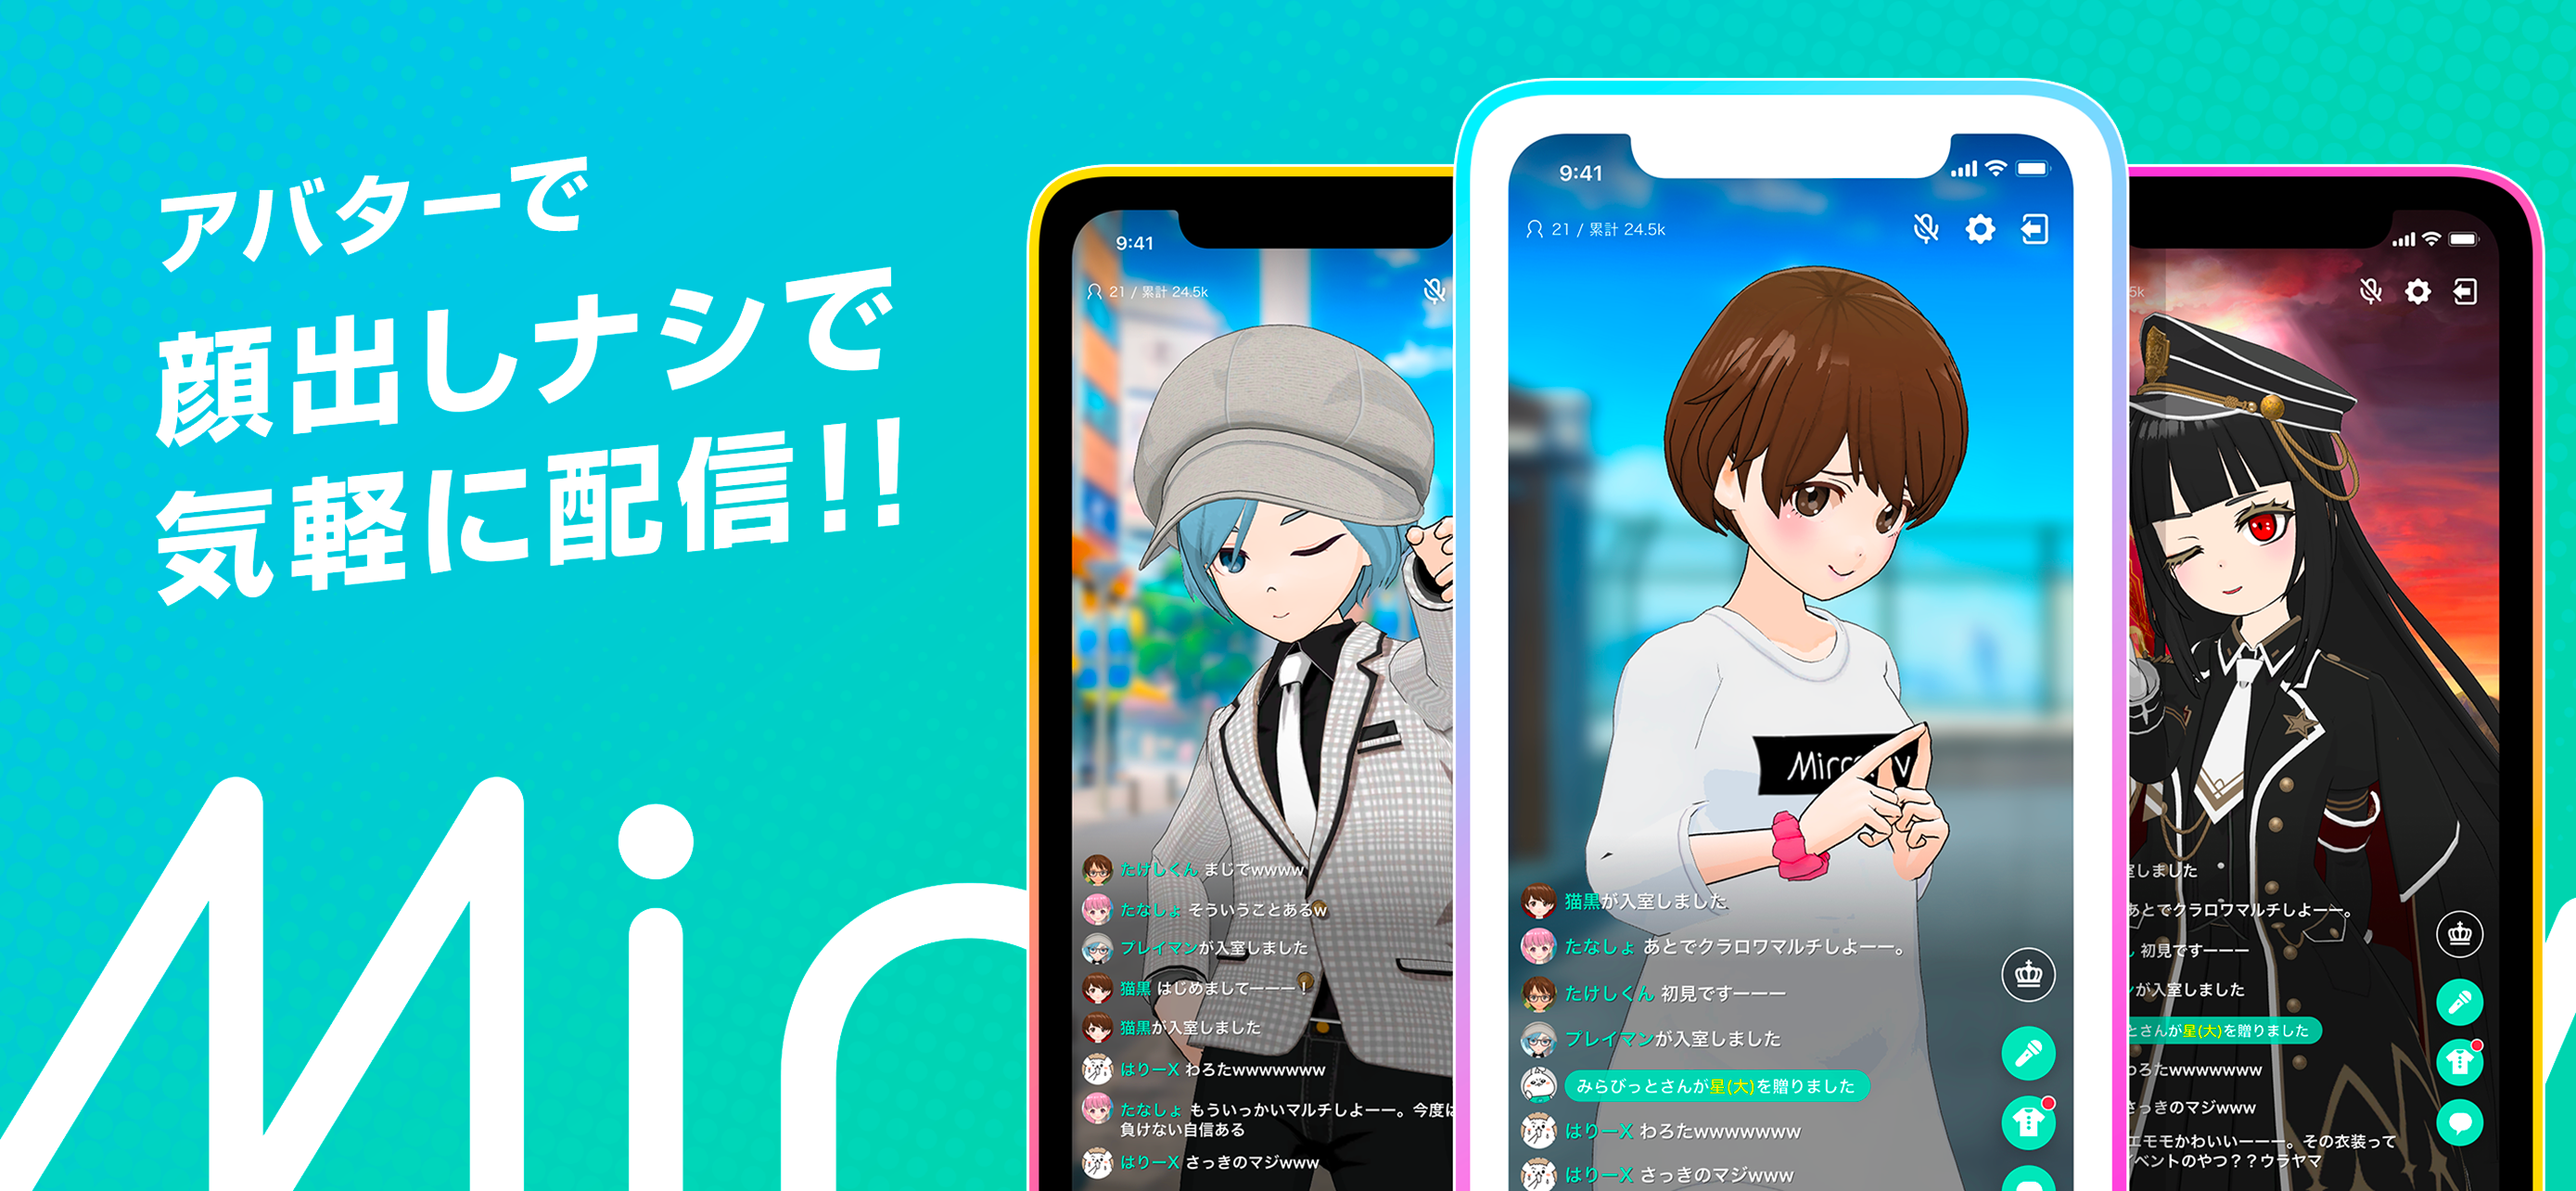 Mirrativ ミラティブ ゲーム実況 アバター配信アプリ Overview Apple App Store Japan